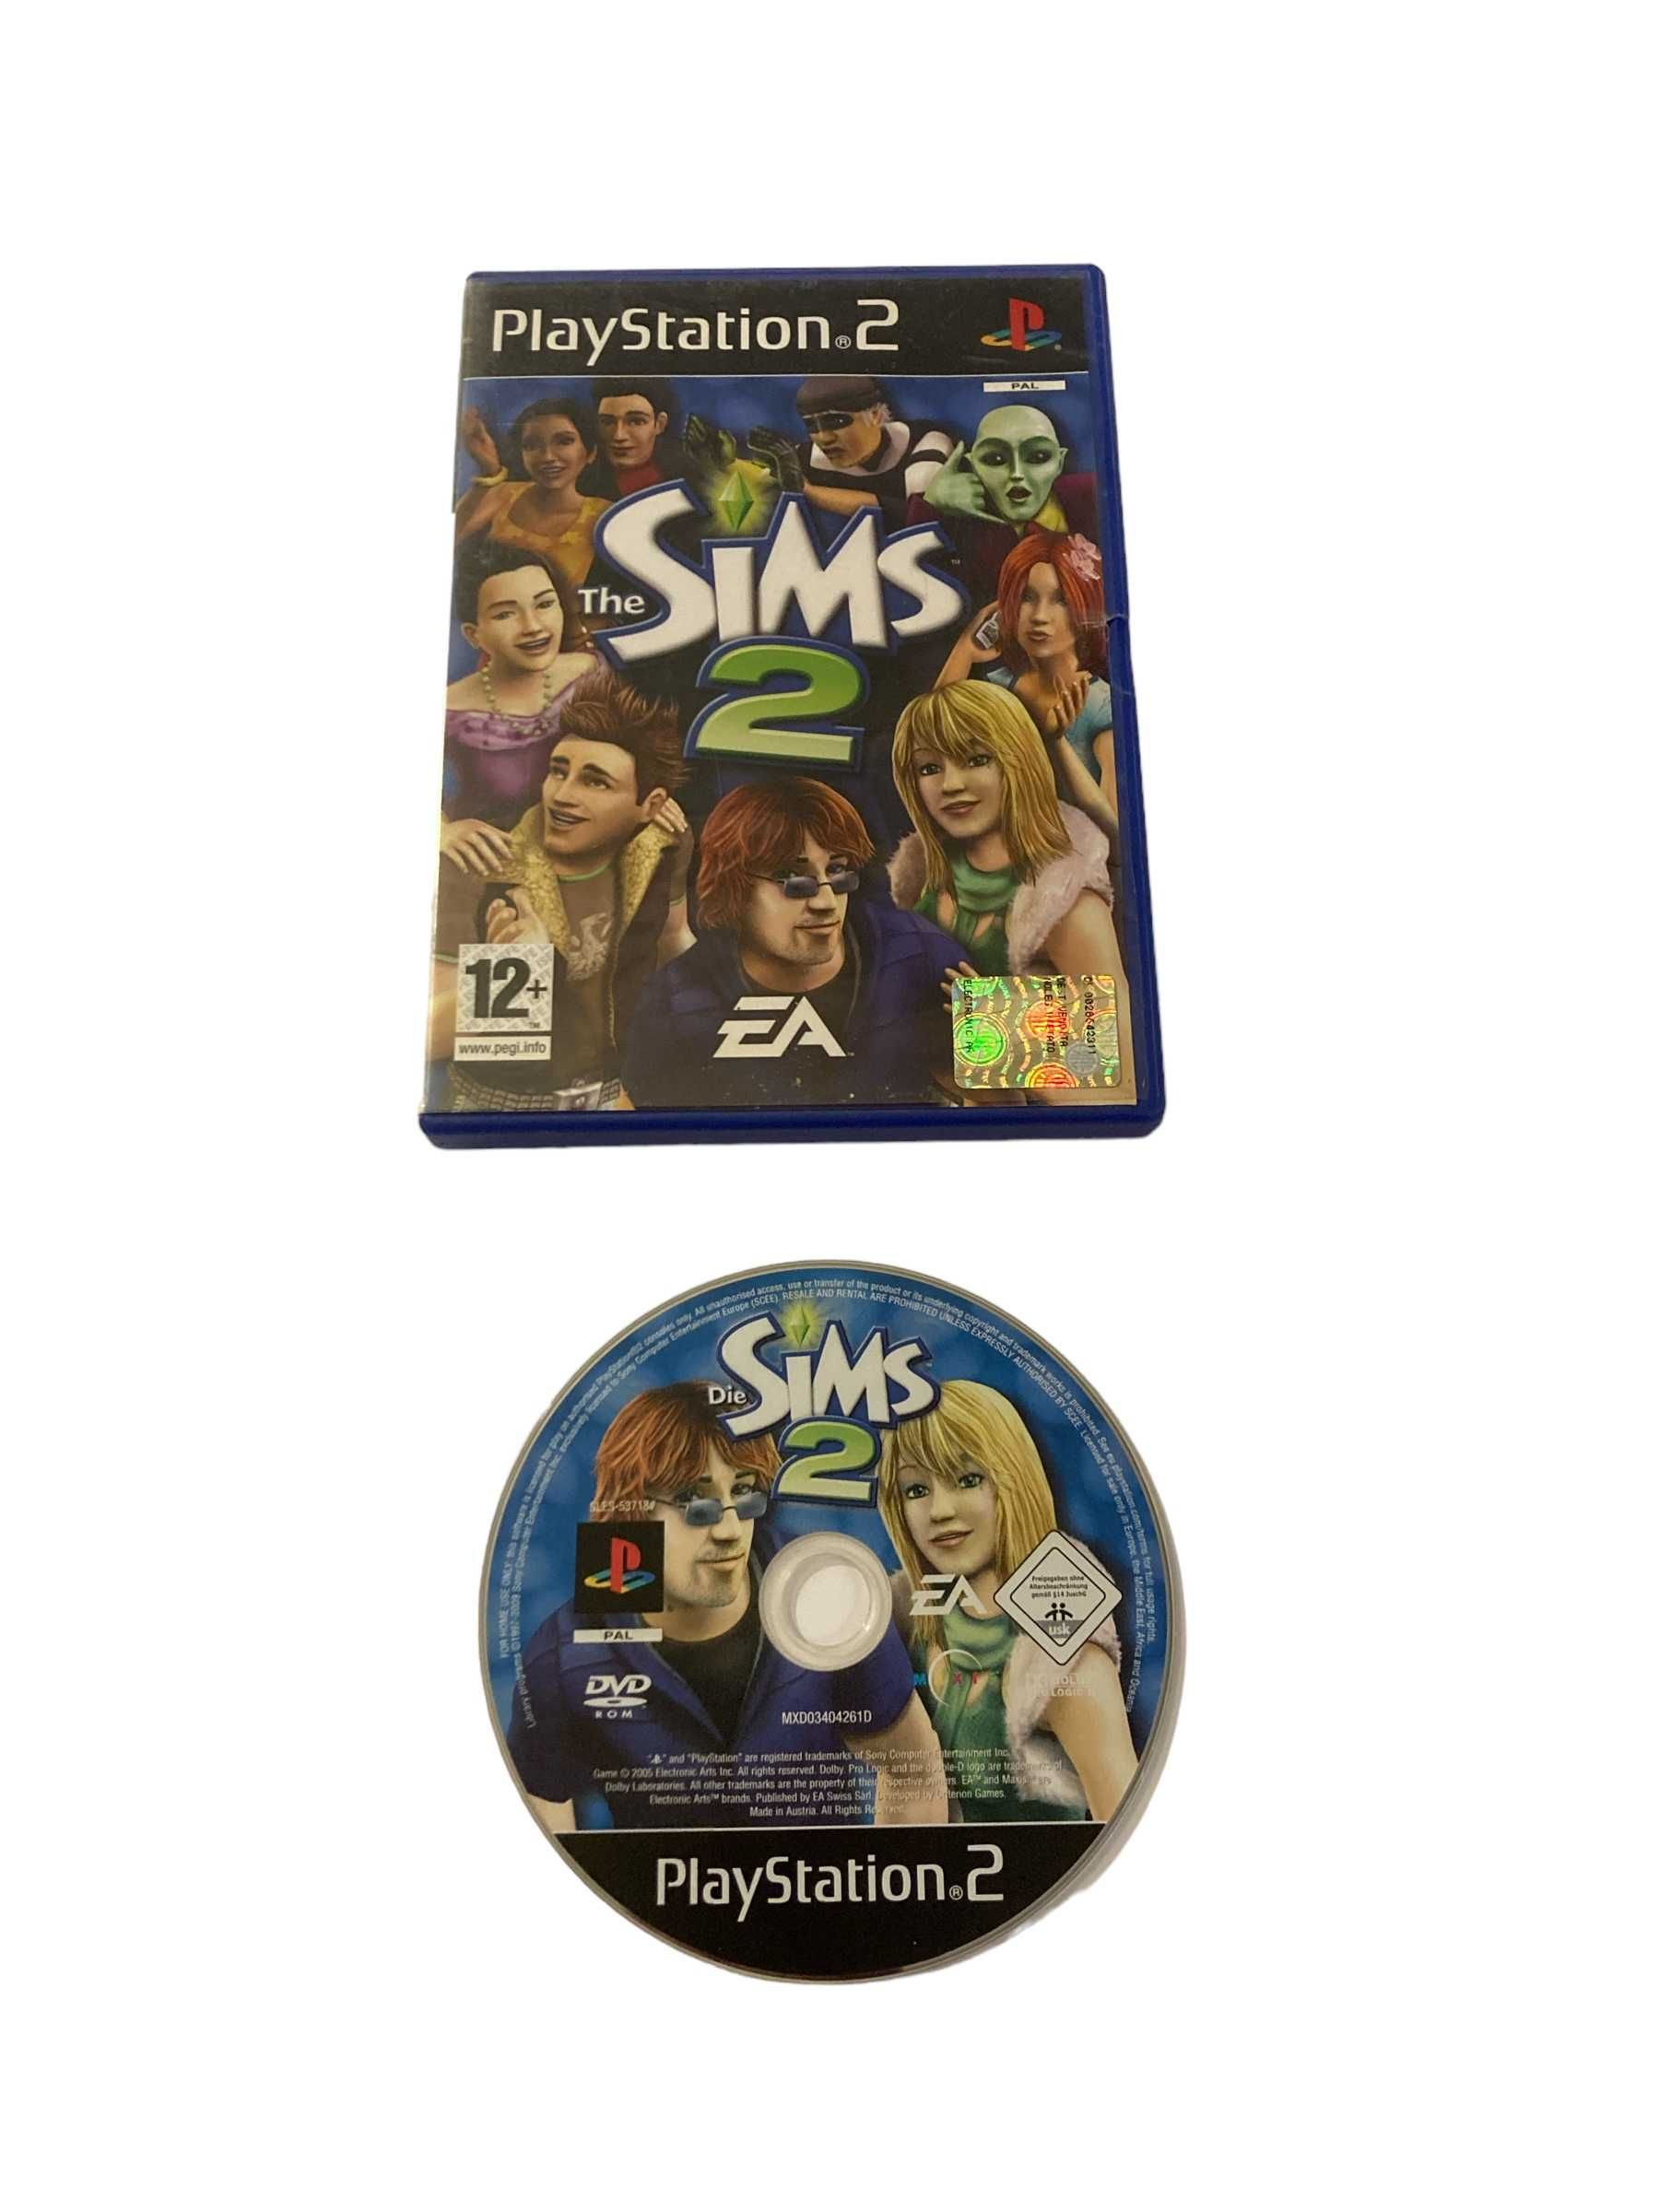 The Sims 2 PS2 .